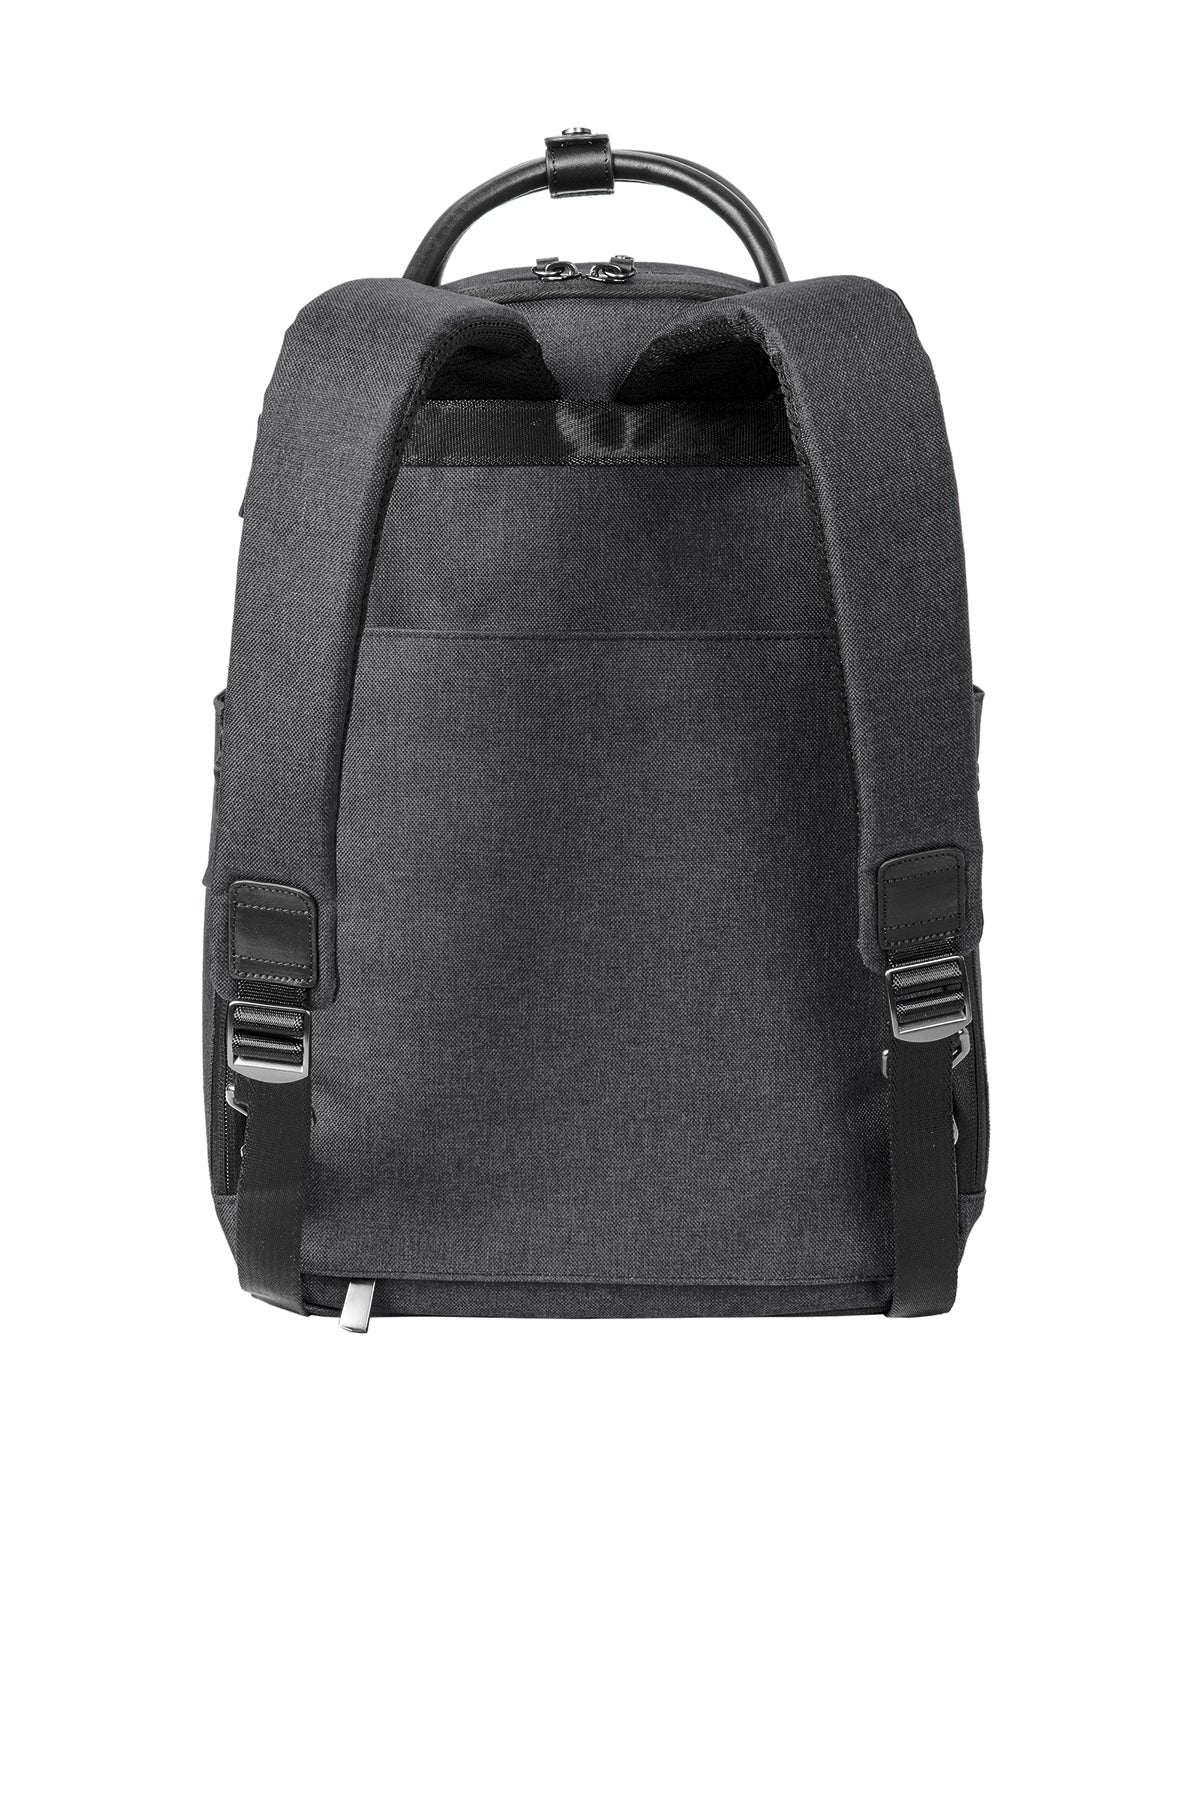 Brooks Brothers Grant Dual-Handle Backpack, Heather Grey